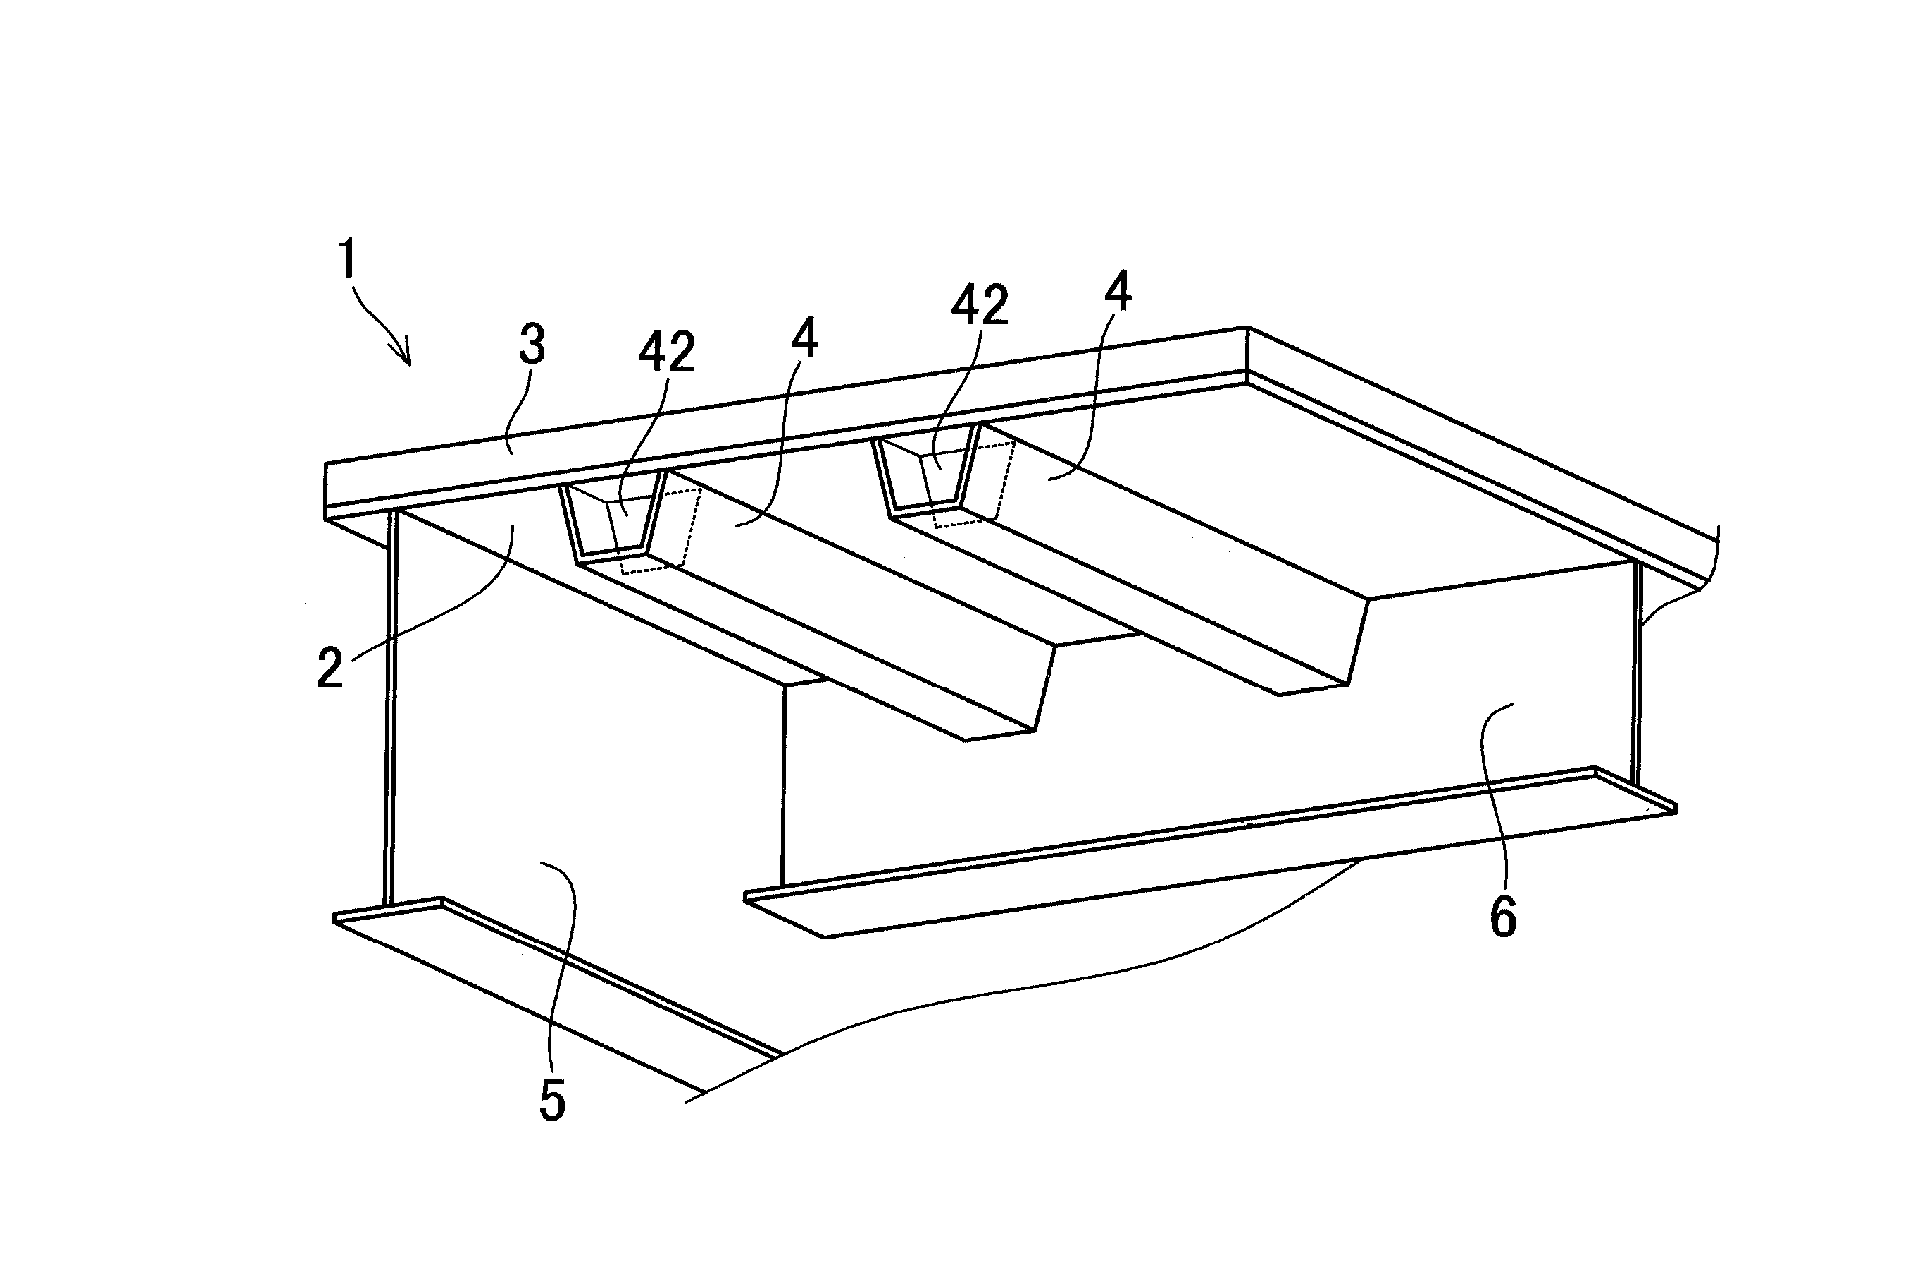 Method for detecting damage to a deck of a bridge